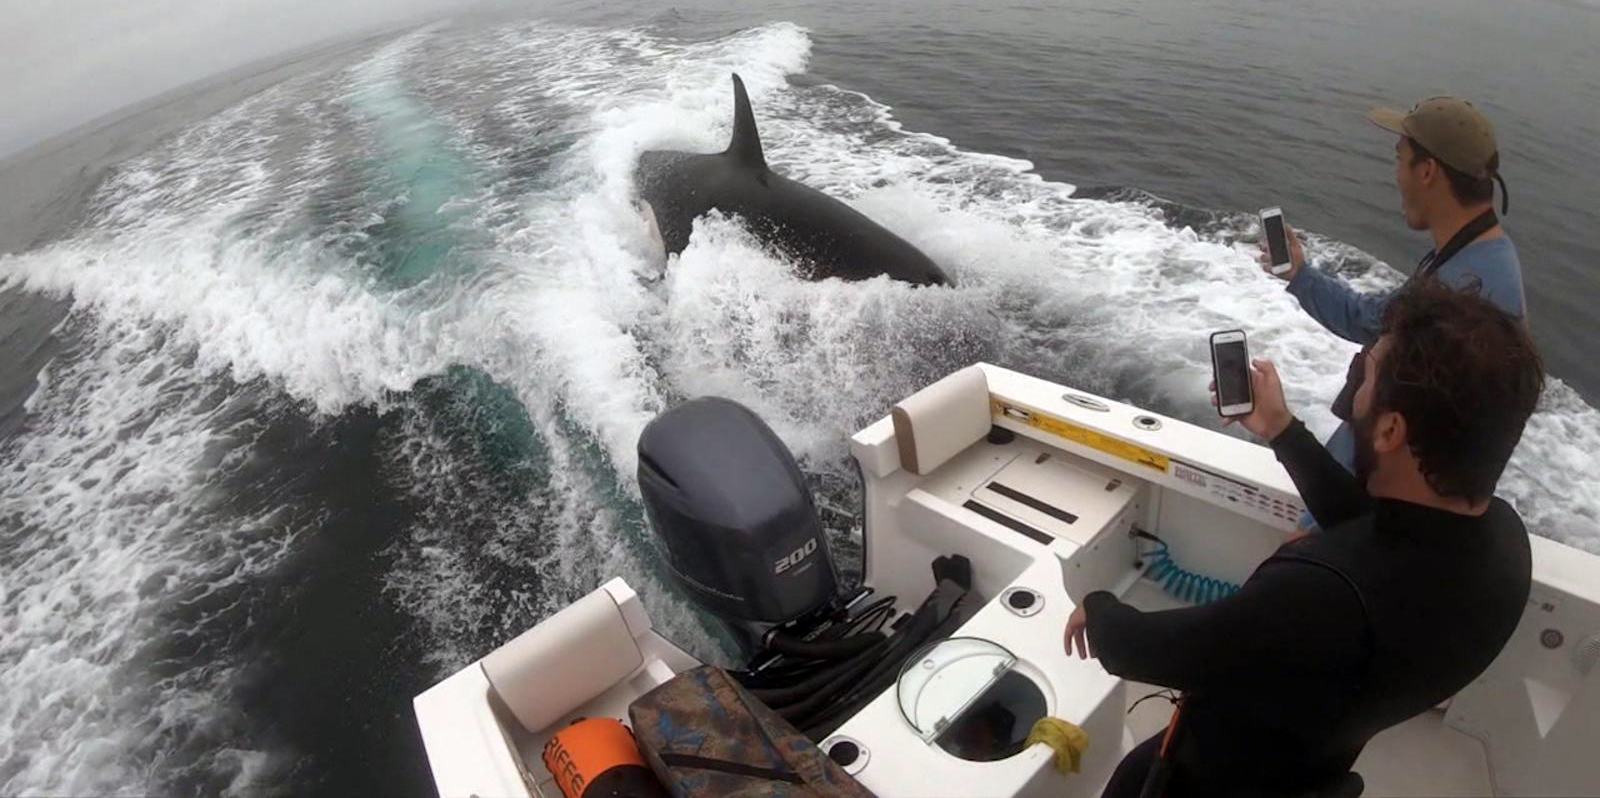 PHOTO: Video captured a close encounter with a fishing boat and an Orca whale off the coast of San Diego, Calif.